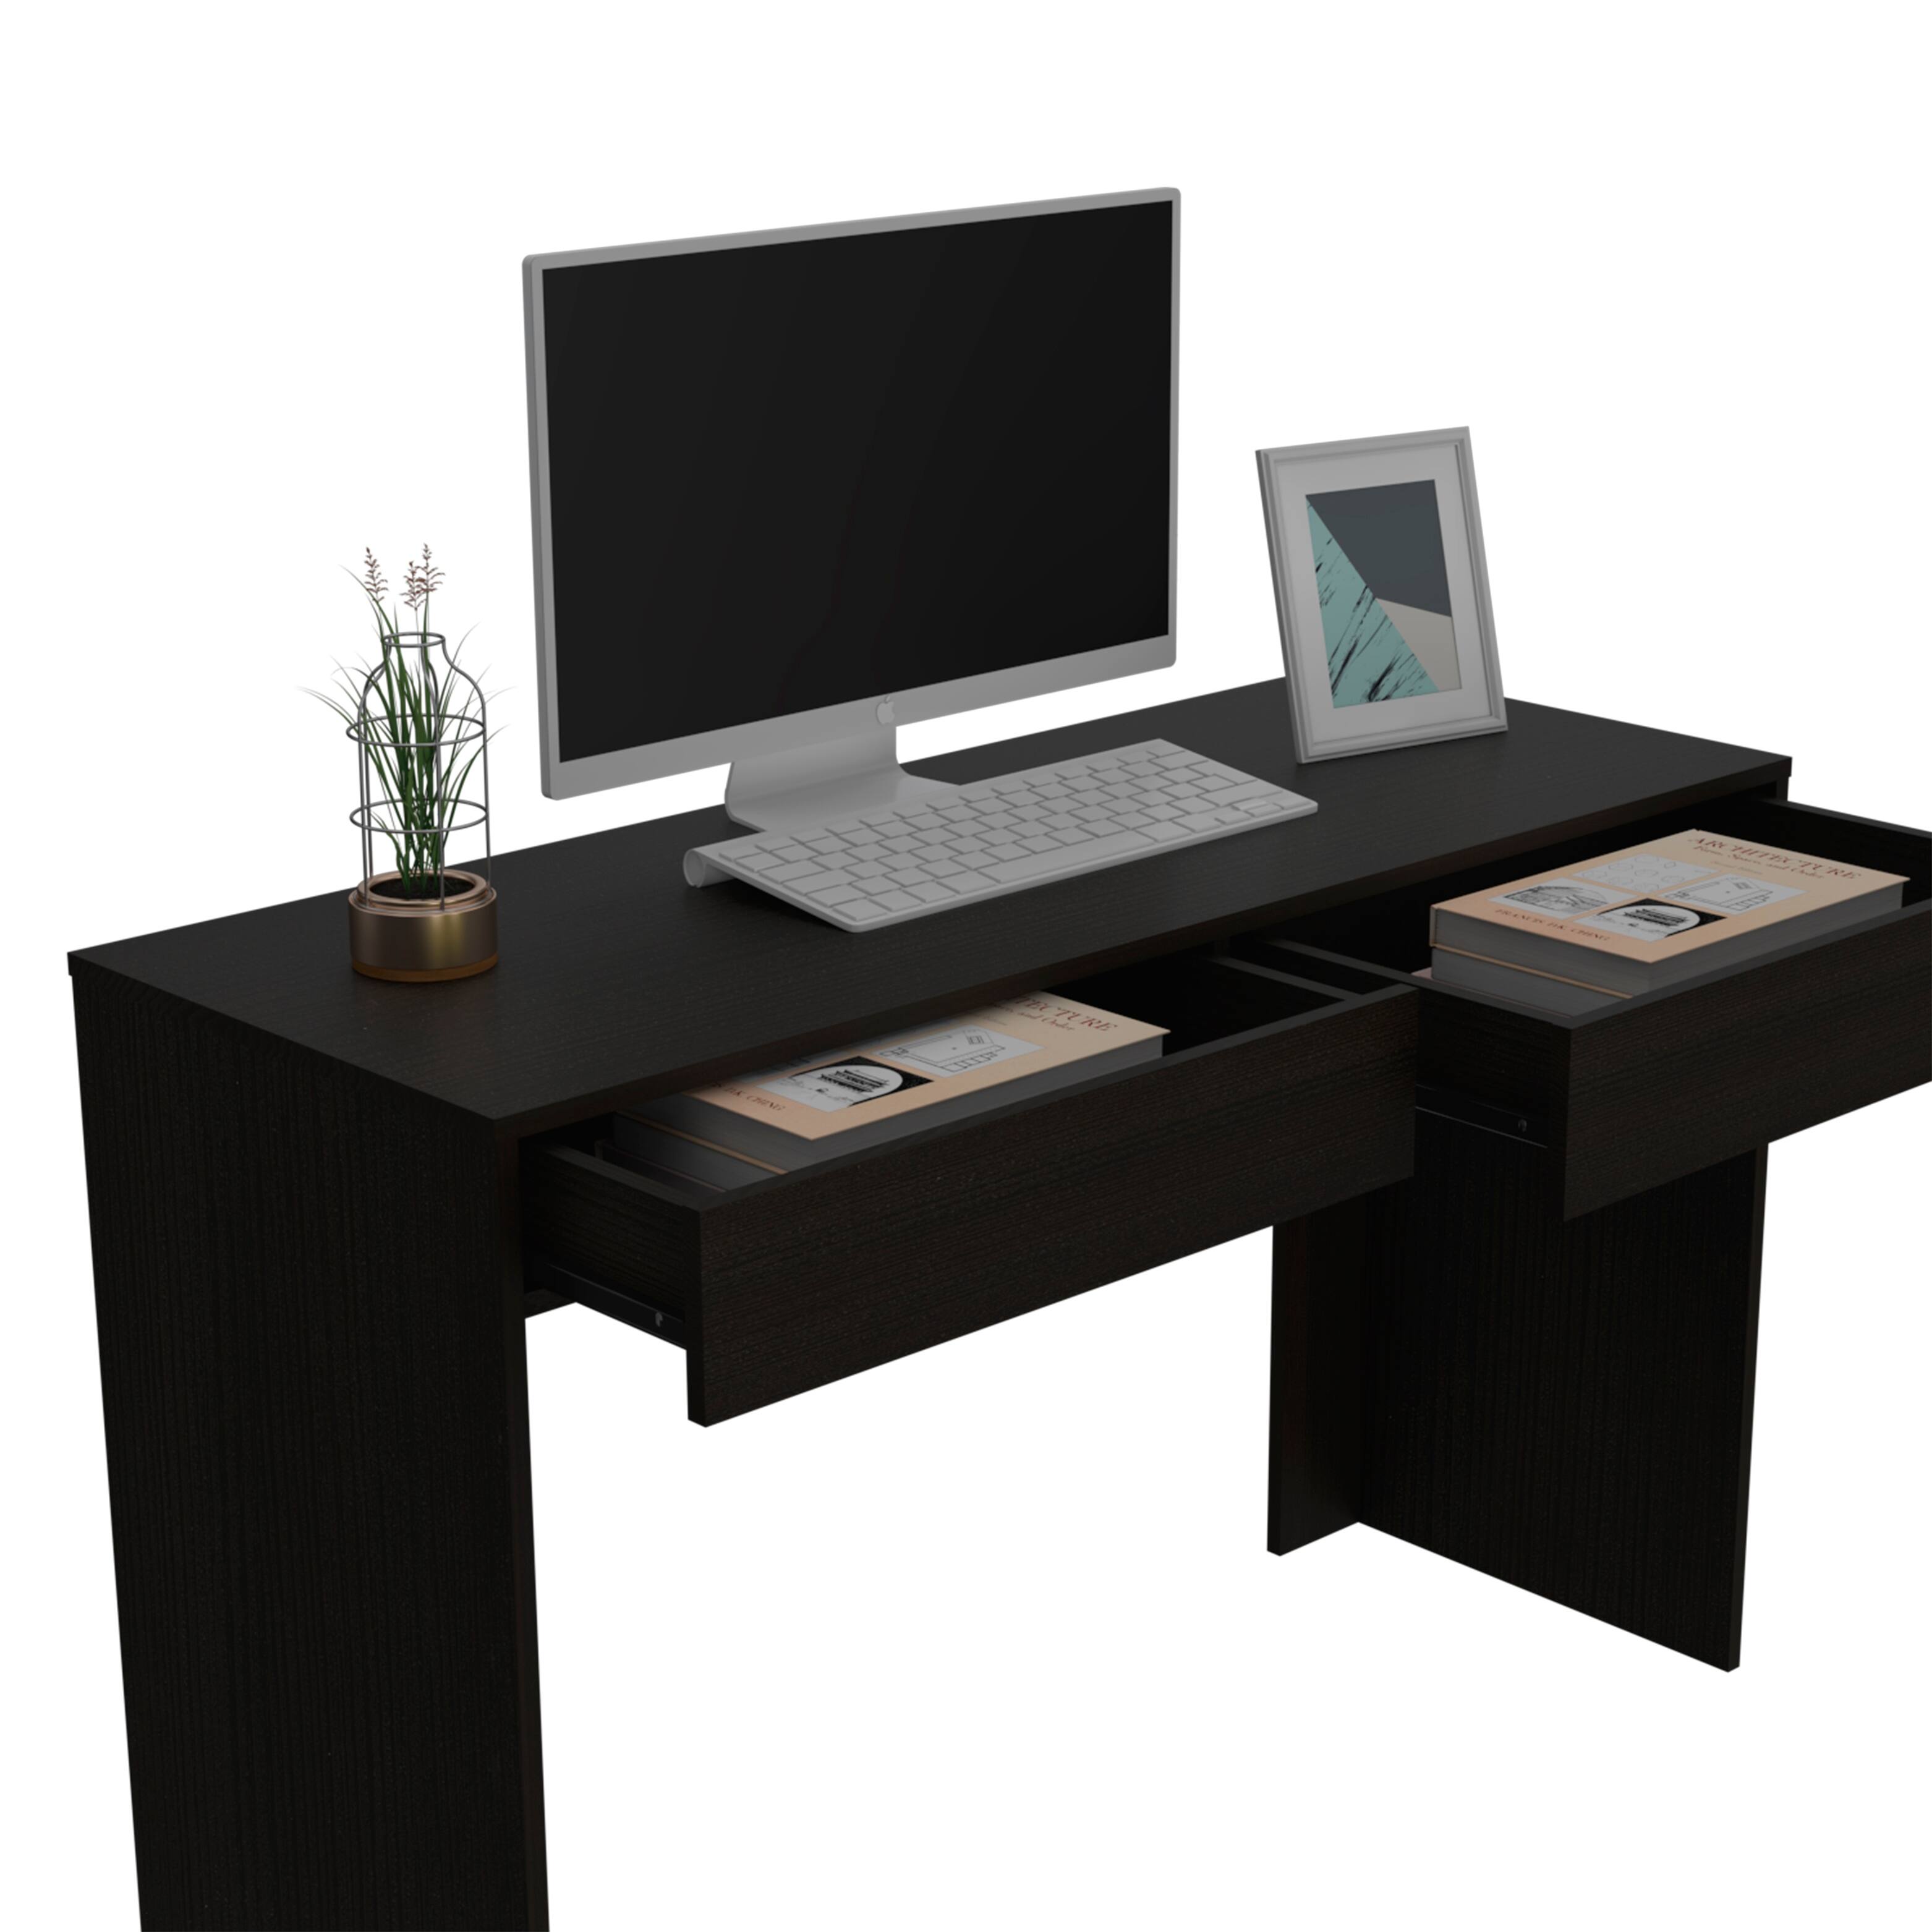 Acre 47-inch Wide Writing Computer Desk with 2 Drawers - Black